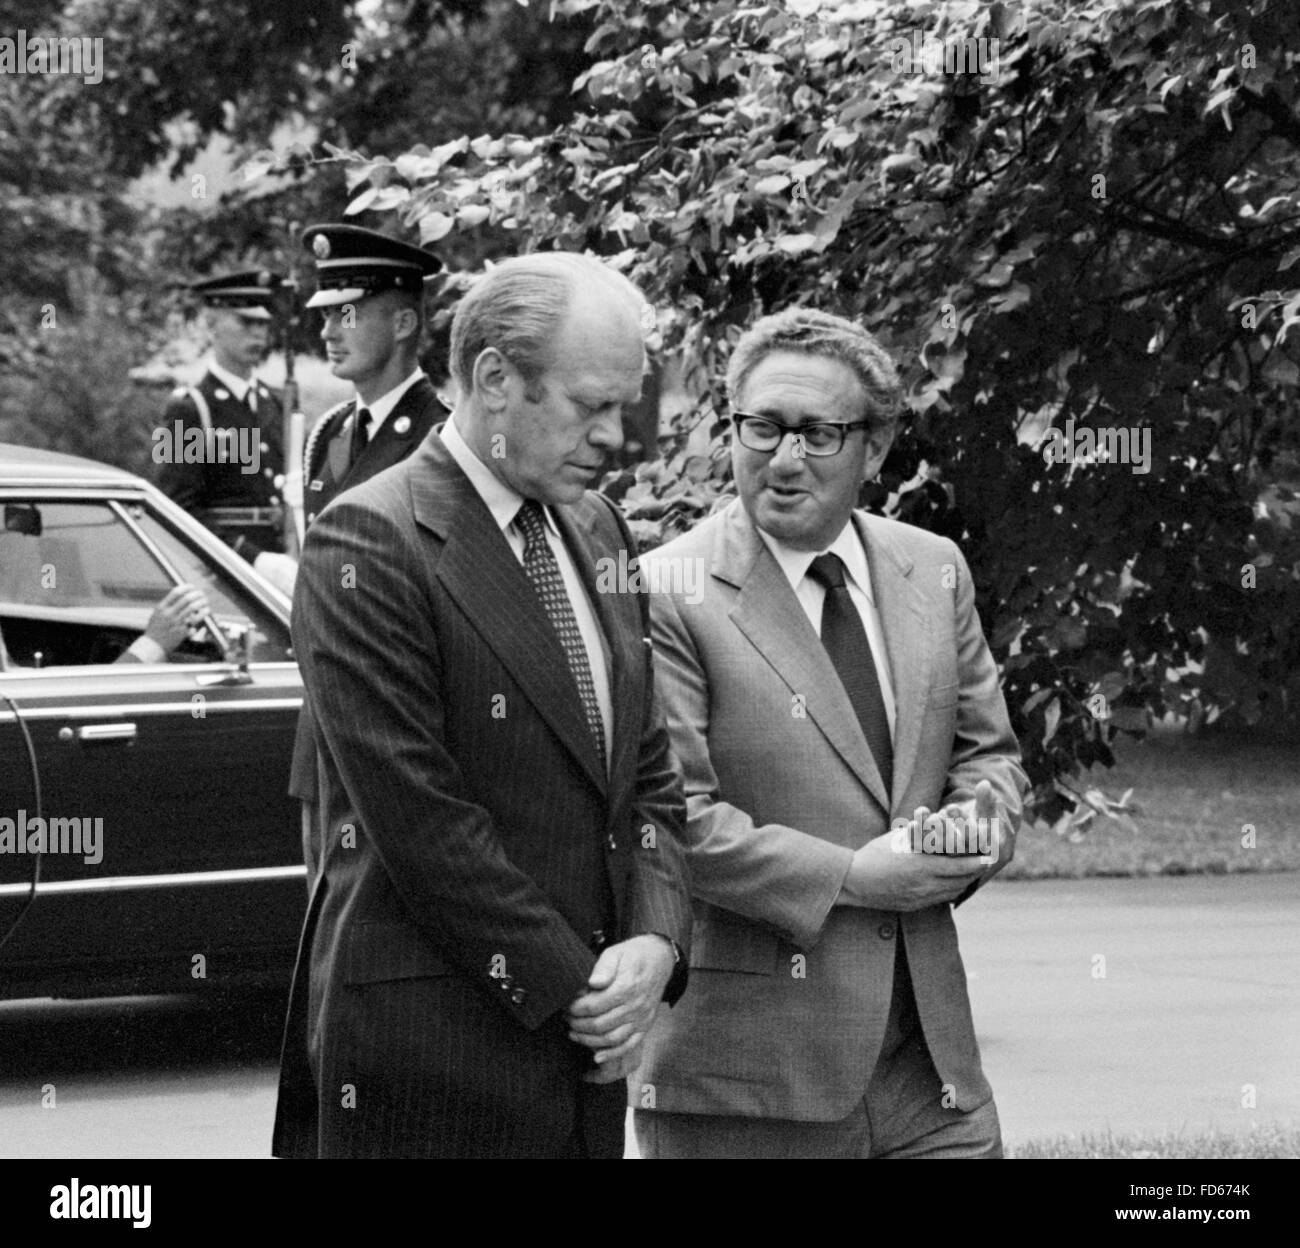 President Gerald Ford on White House grounds with Henry Kissinger Photo Print